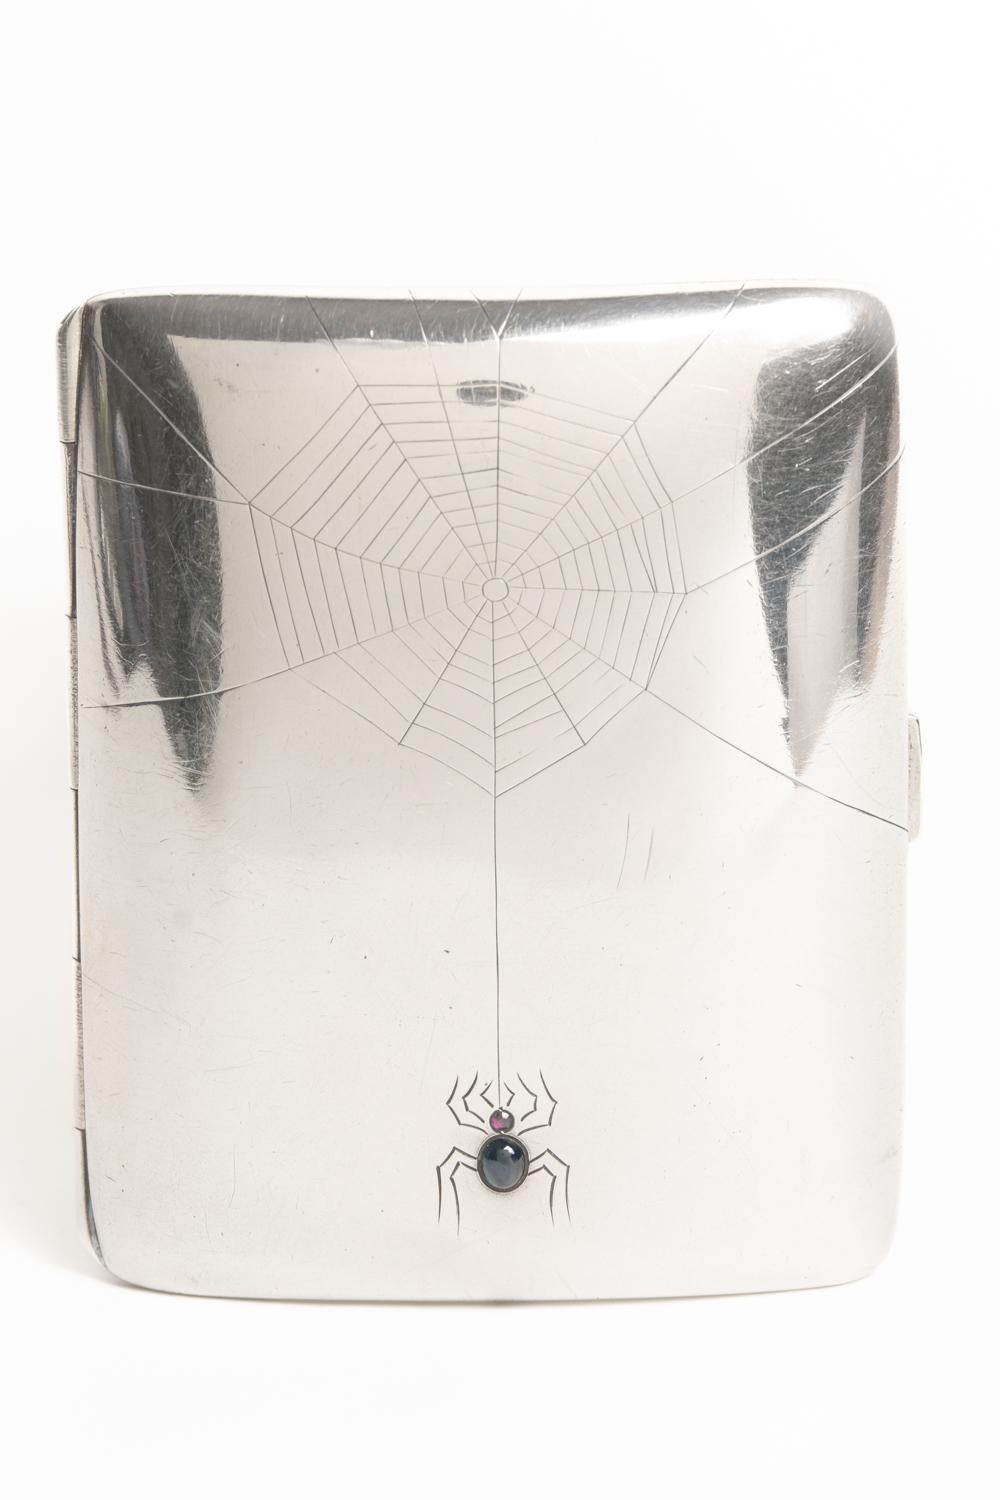 This rare and exceptional Jugendstil sterling silver cigarette case is made in silver 800/Austria circa 1900. The cigarette case has a rectangular and unusual bulbous shape and depicts an engraving of a spider and web in the front of the case. The